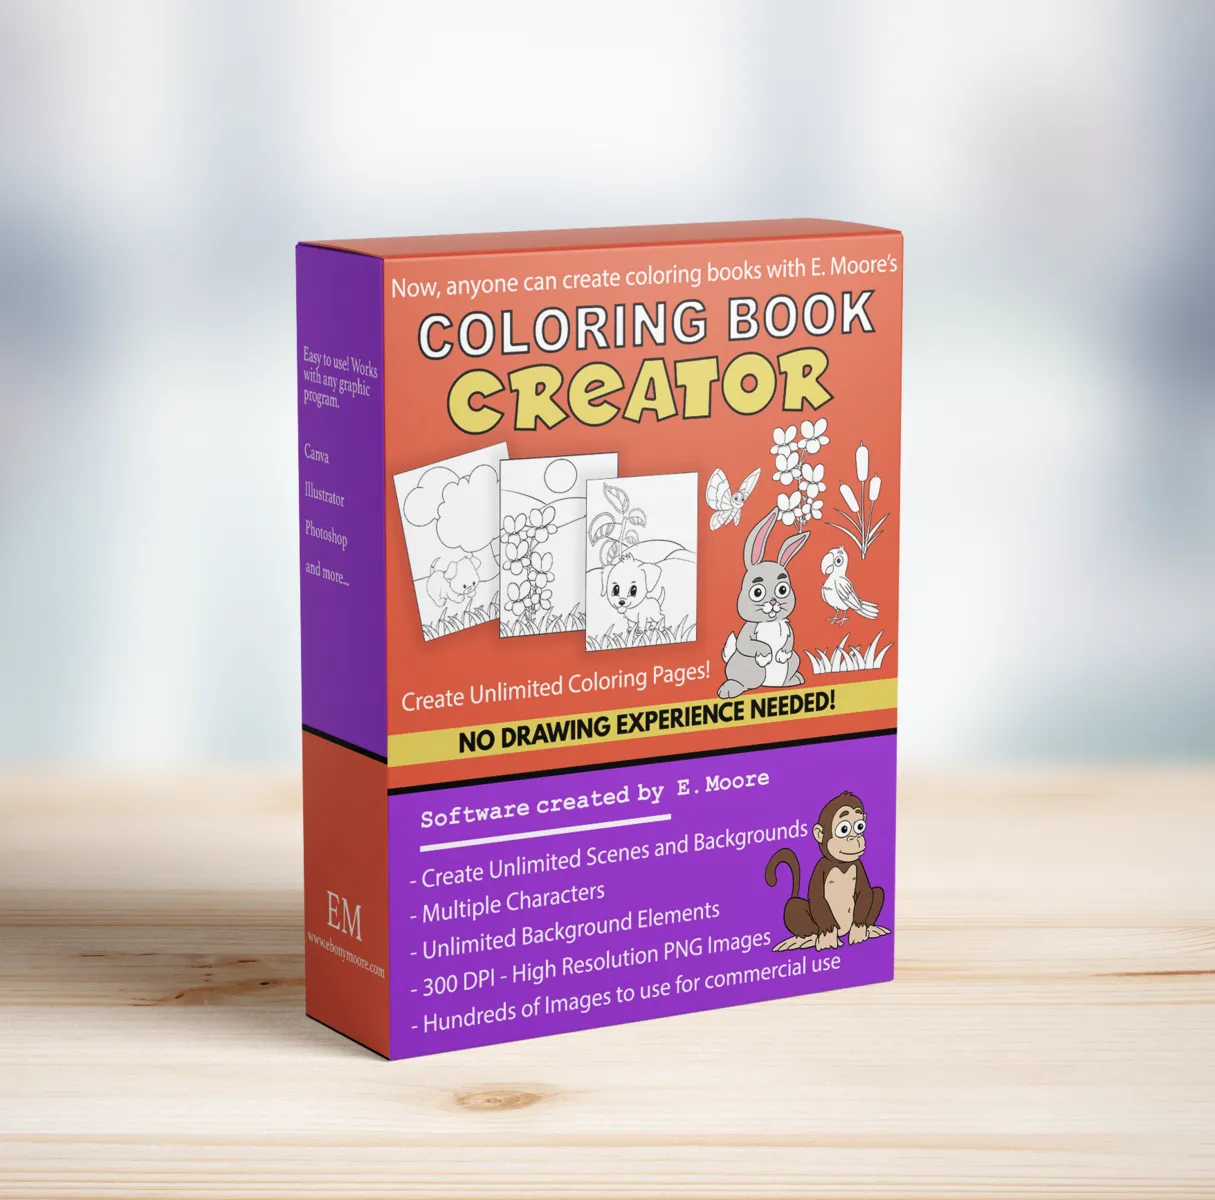 E. Moore's Coloring Book Creator Pack